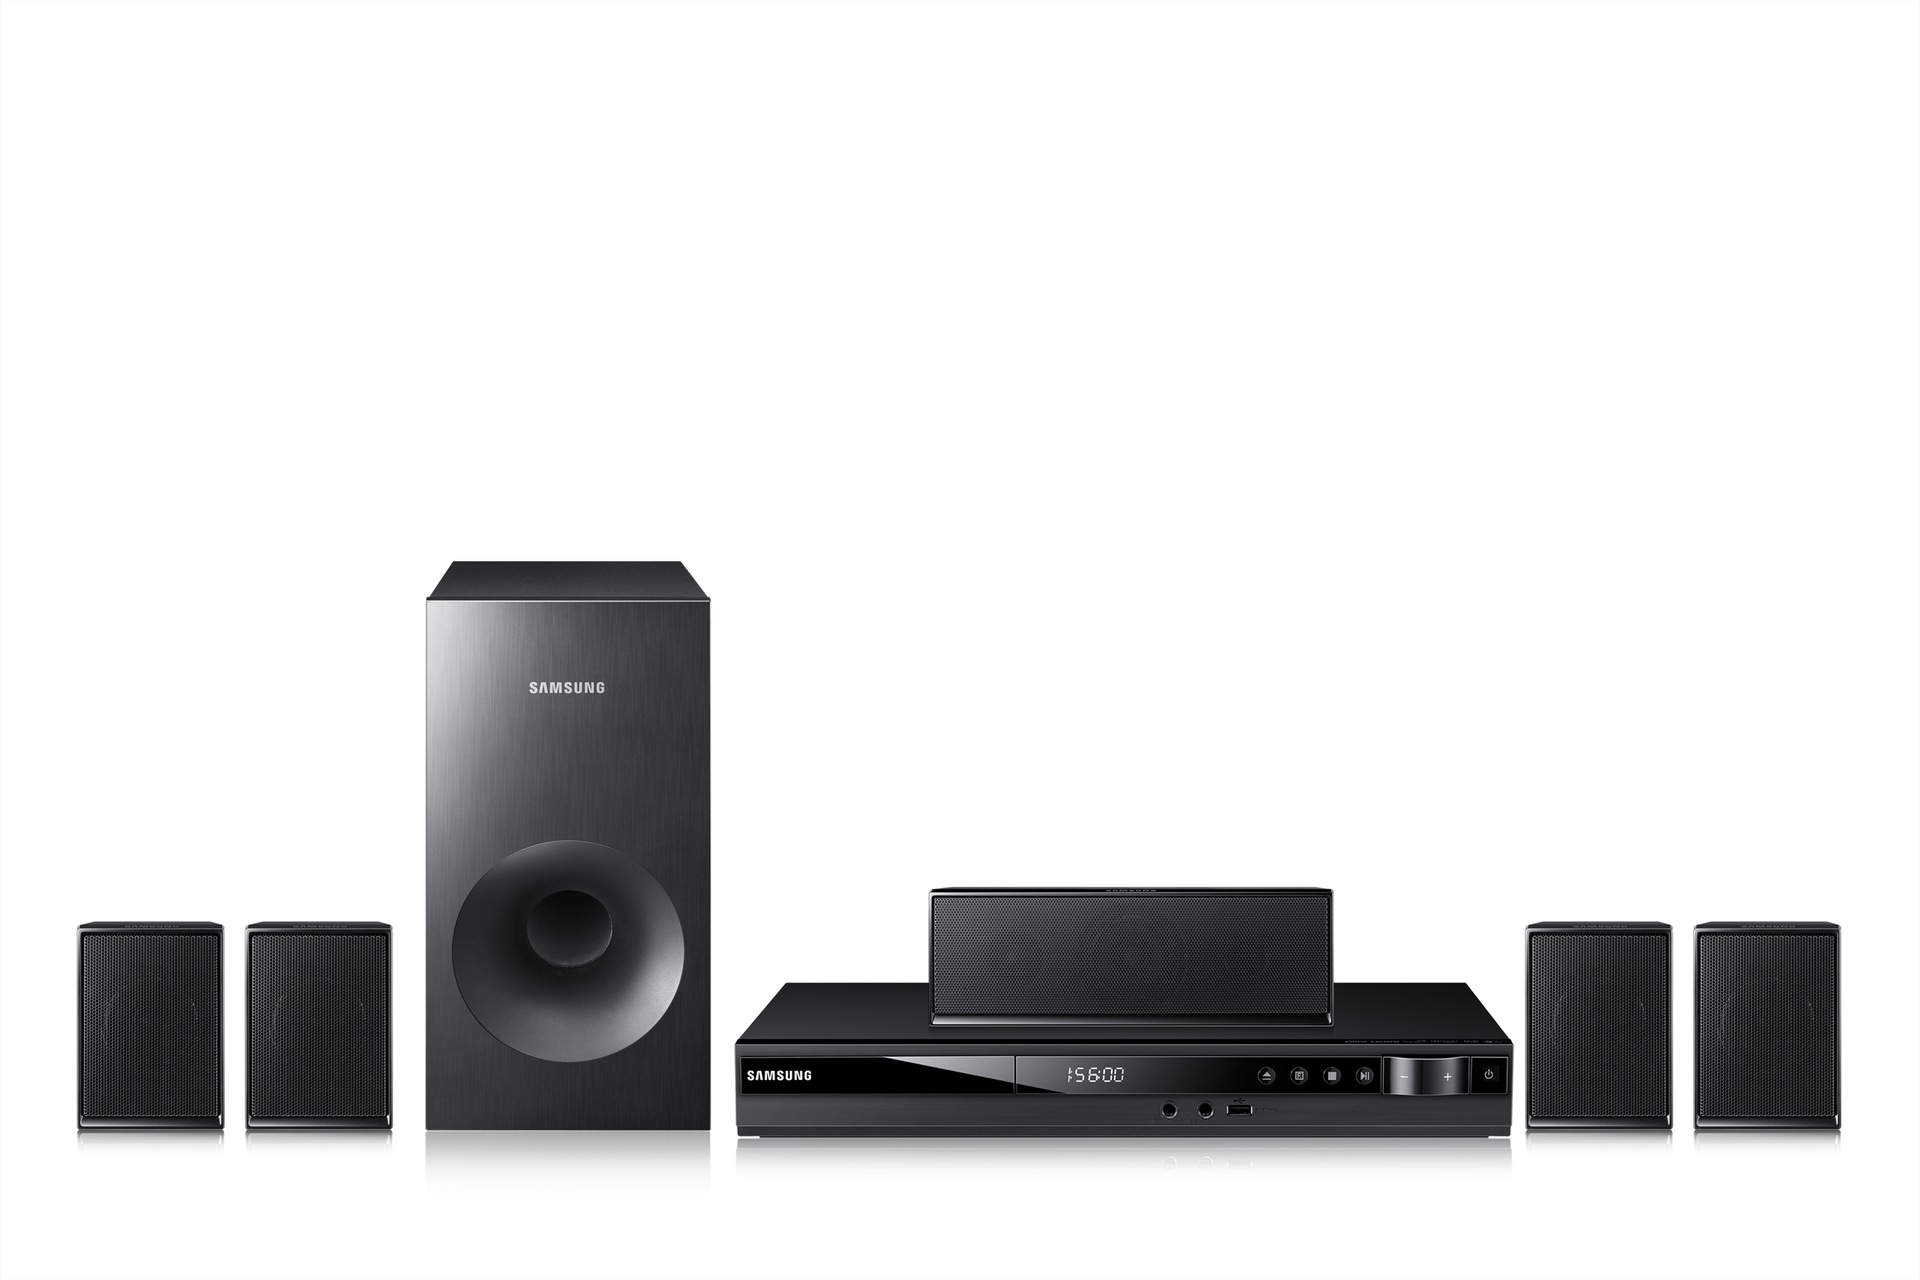 Samsung 5.1 Home Theatre Price, Buy Home Theatre System, Specs, Reviews3000 x 2000